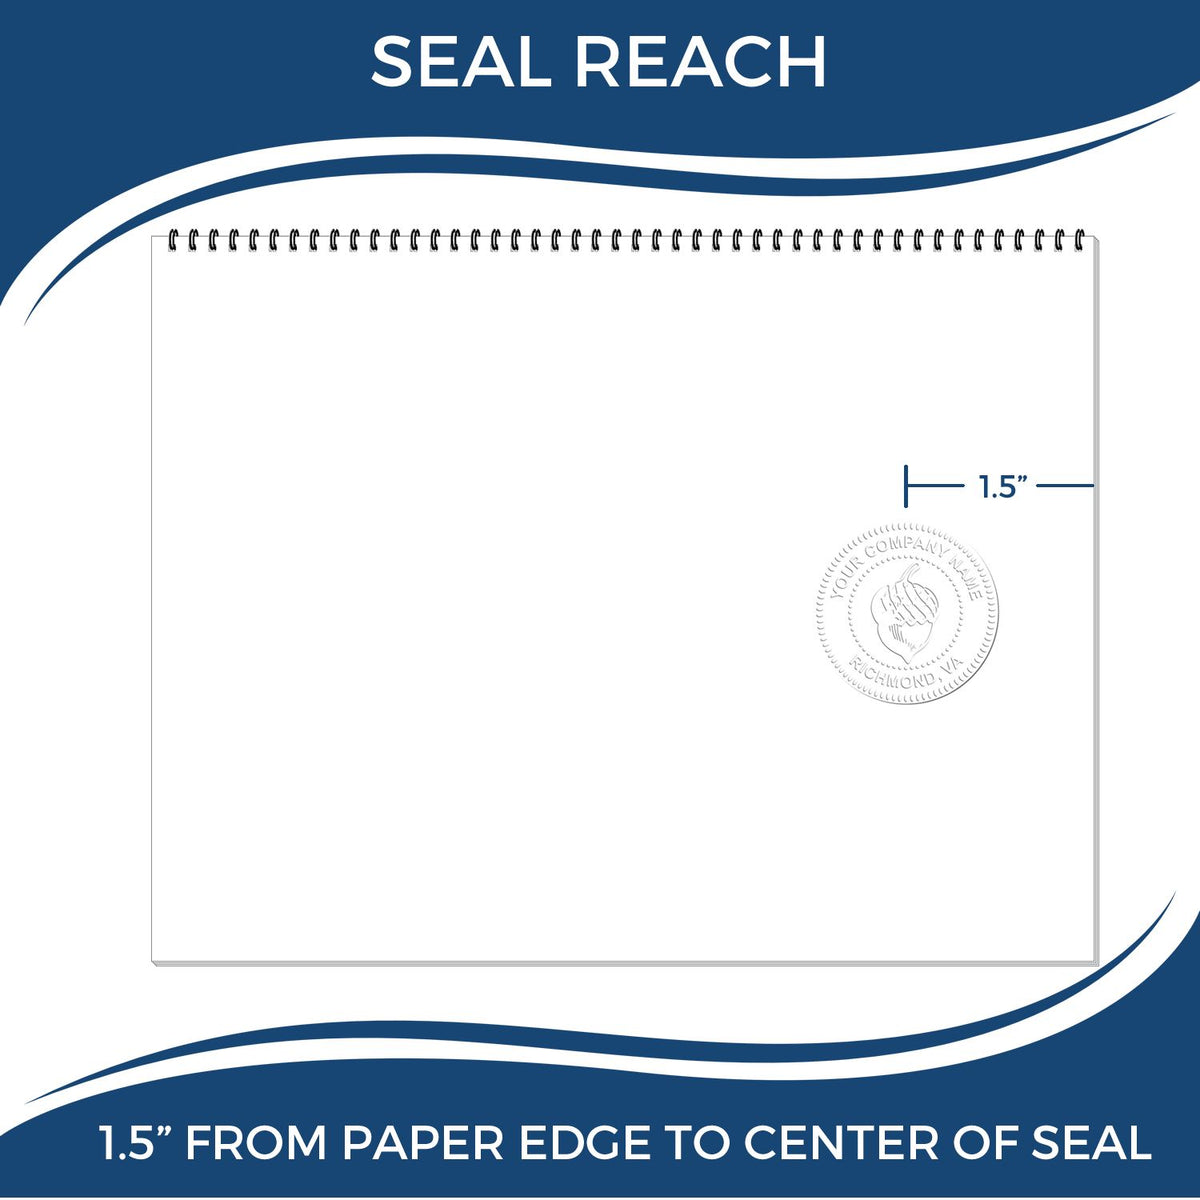 An infographic showing the seal reach which is represented by a ruler and a miniature seal image of the New Jersey Geologist Desk Seal